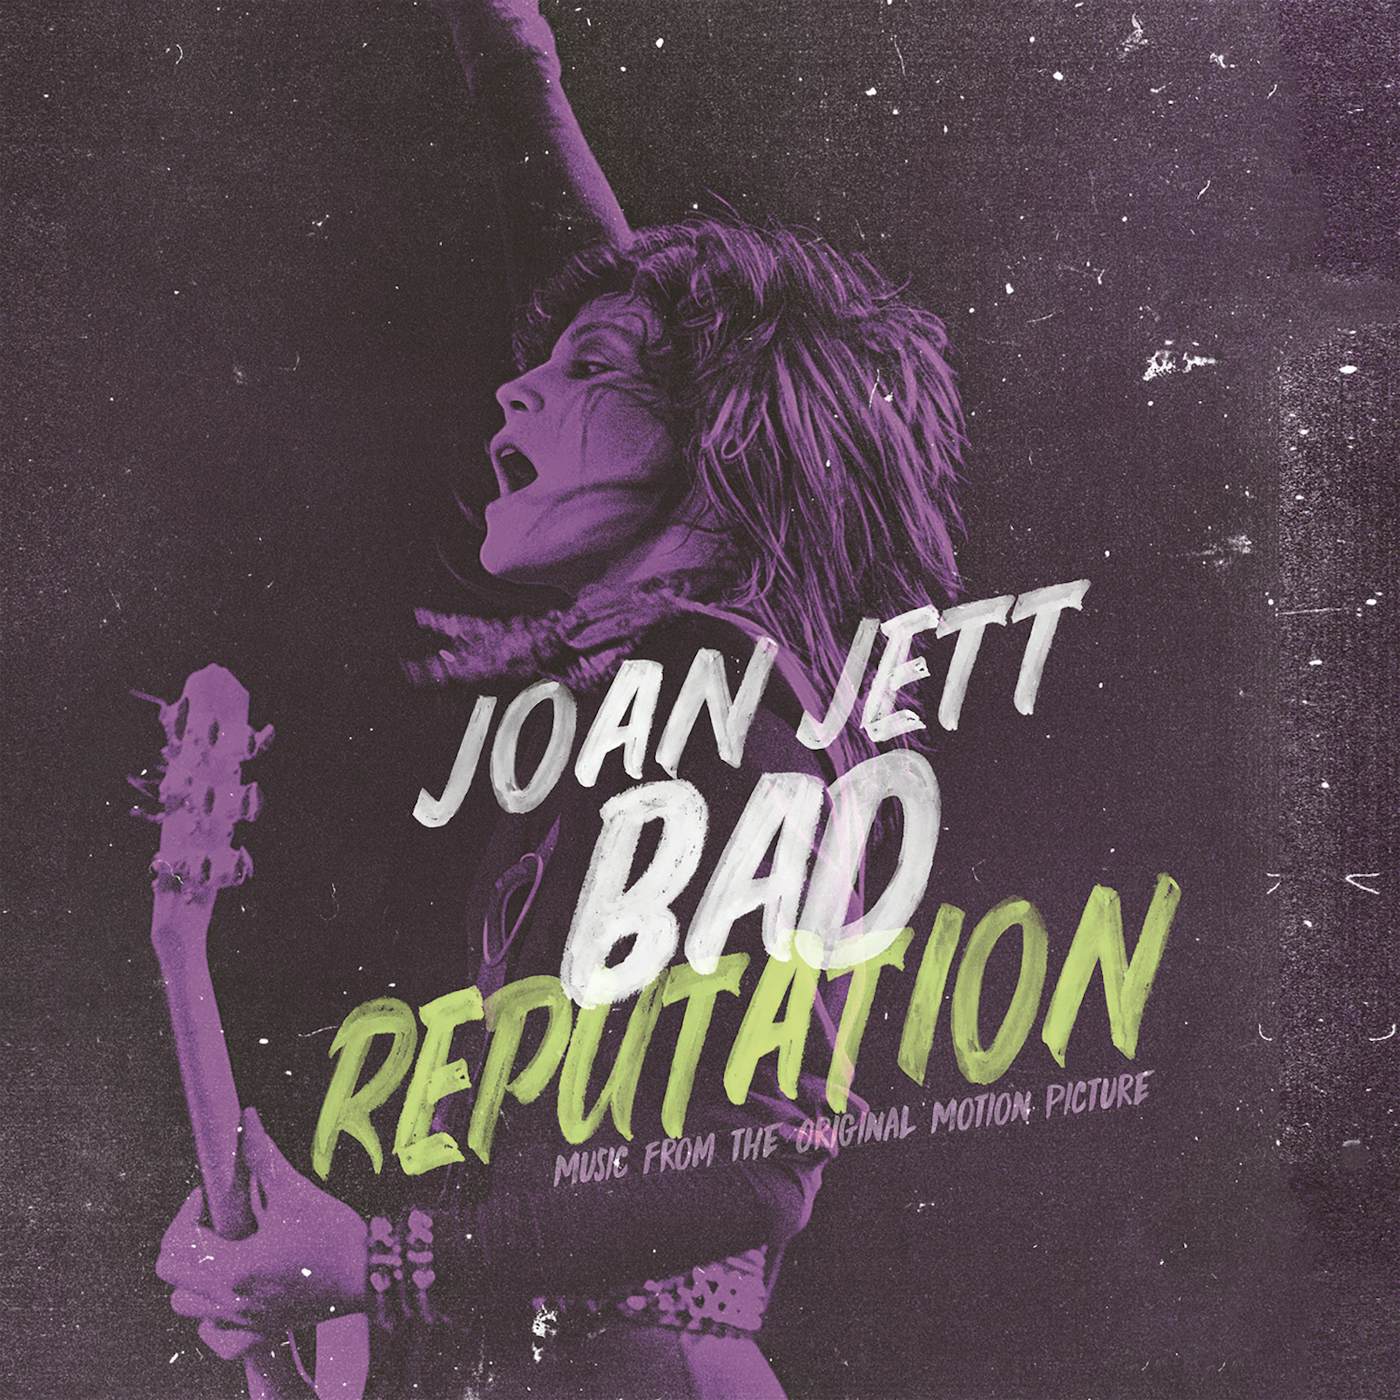 Joan Jett & the Blackhearts BAD REPUTATION: MUSIC FROM ORIGINAL MOTION PICTURE CD